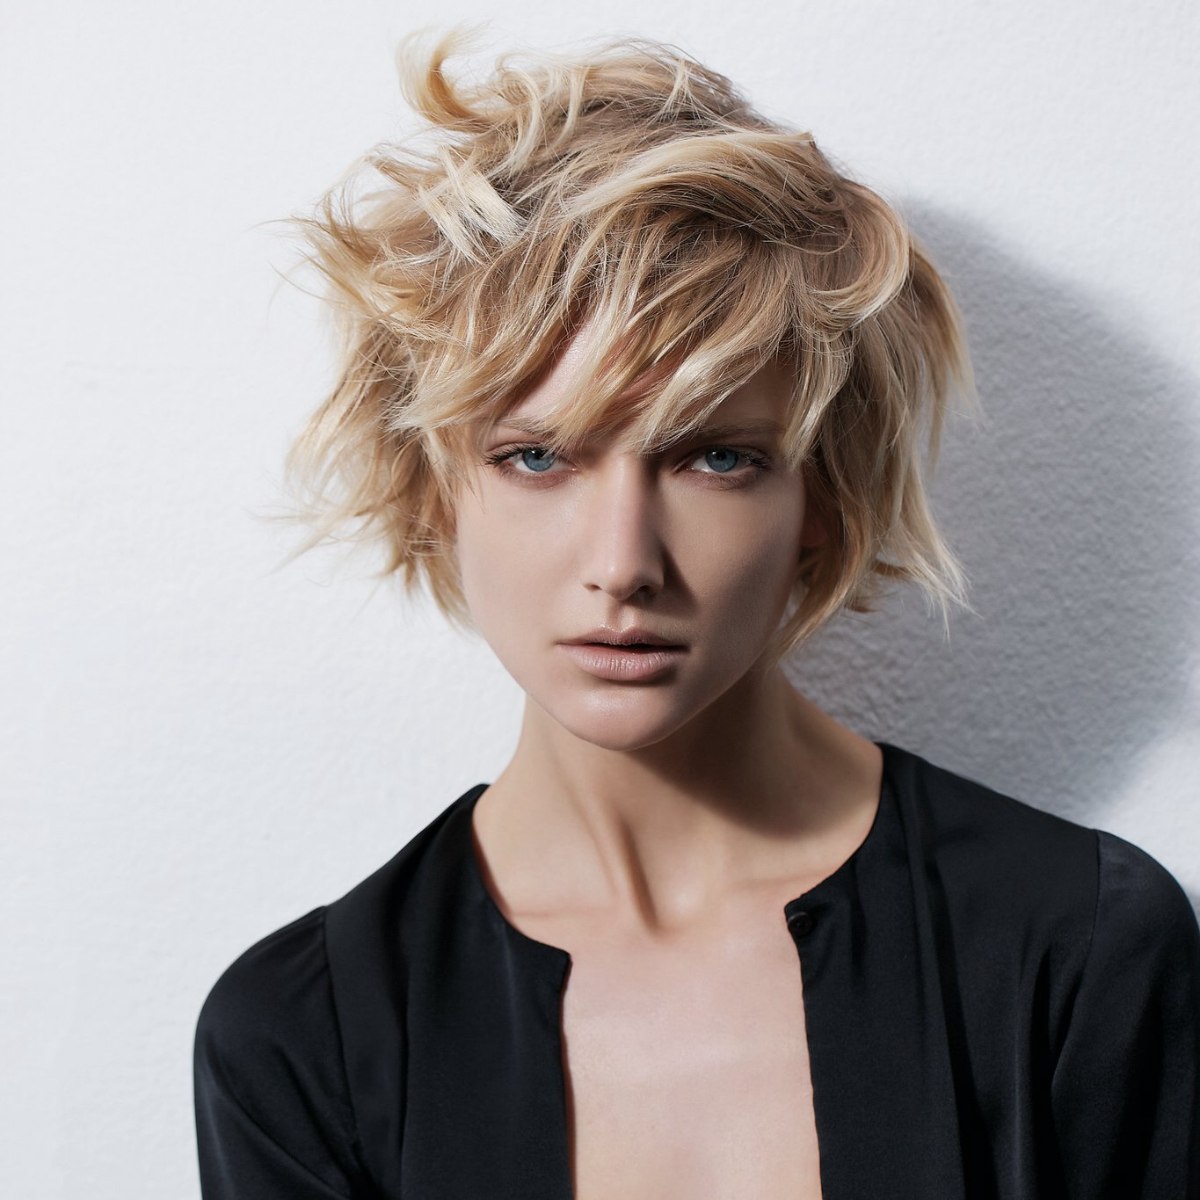 Trends in hairstyling for long, medium and short hairstyles